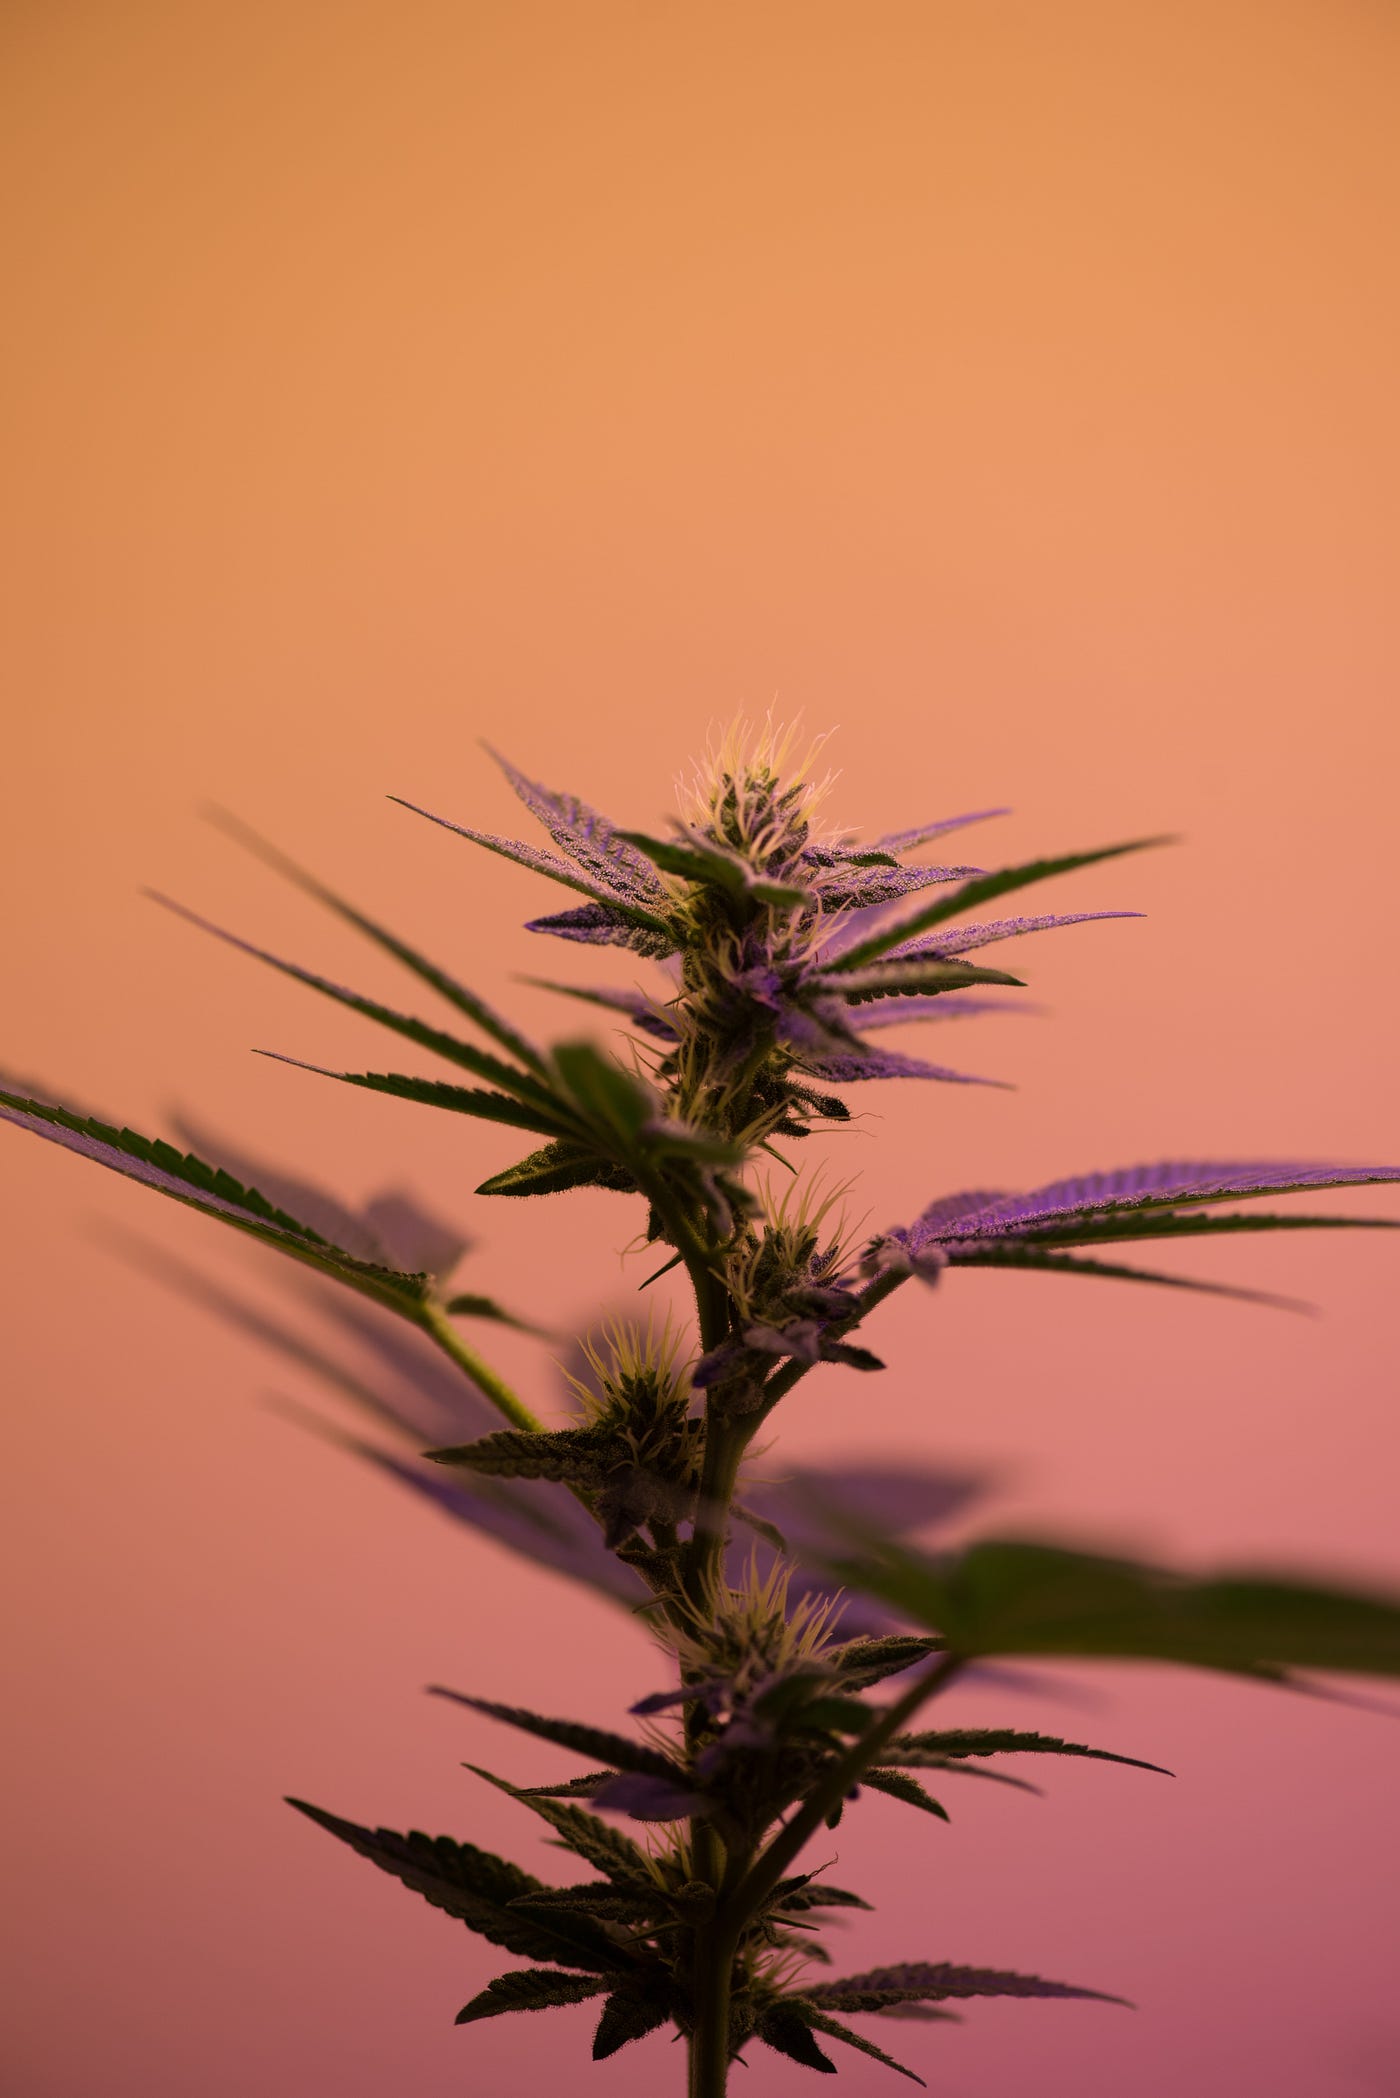 A marijuana plan, with purple flowers. Overdose is also possible with edible cannabis (though an overdose on cannabis is rarely fatal). Users taking it by mouth may not notice any effects for up to two hours. They may then ingest more, thinking they need a higher dose, and take too much.